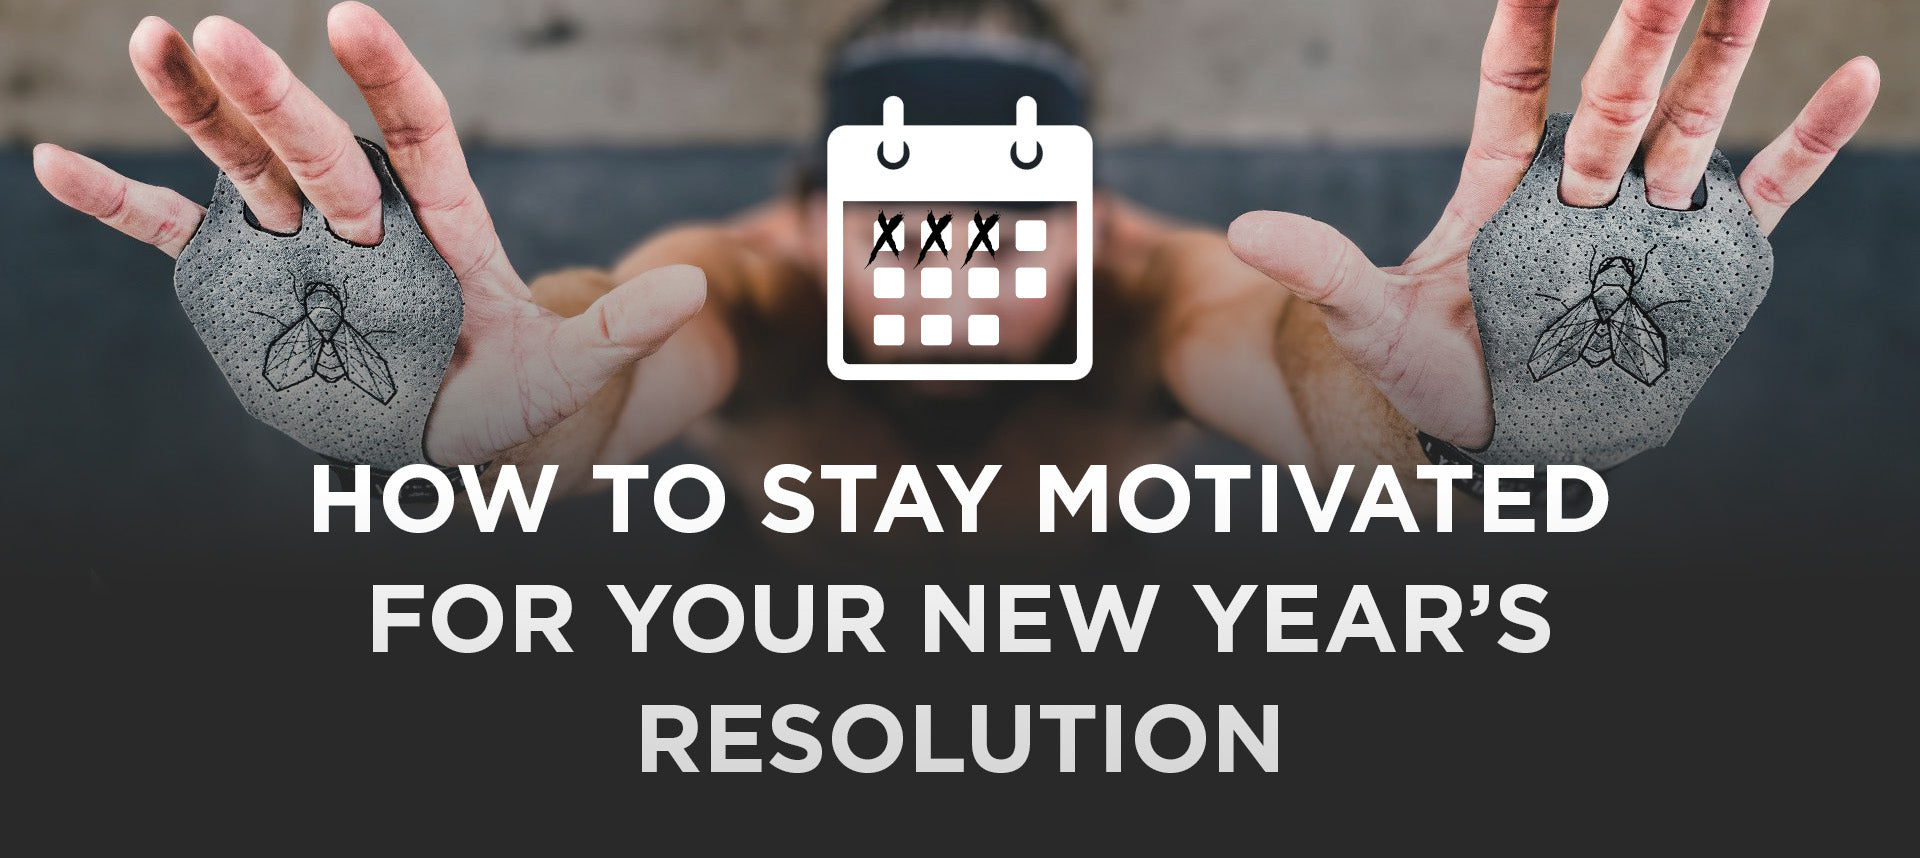 3 Ways to Stay Motivated For Your New Year’s Resolution